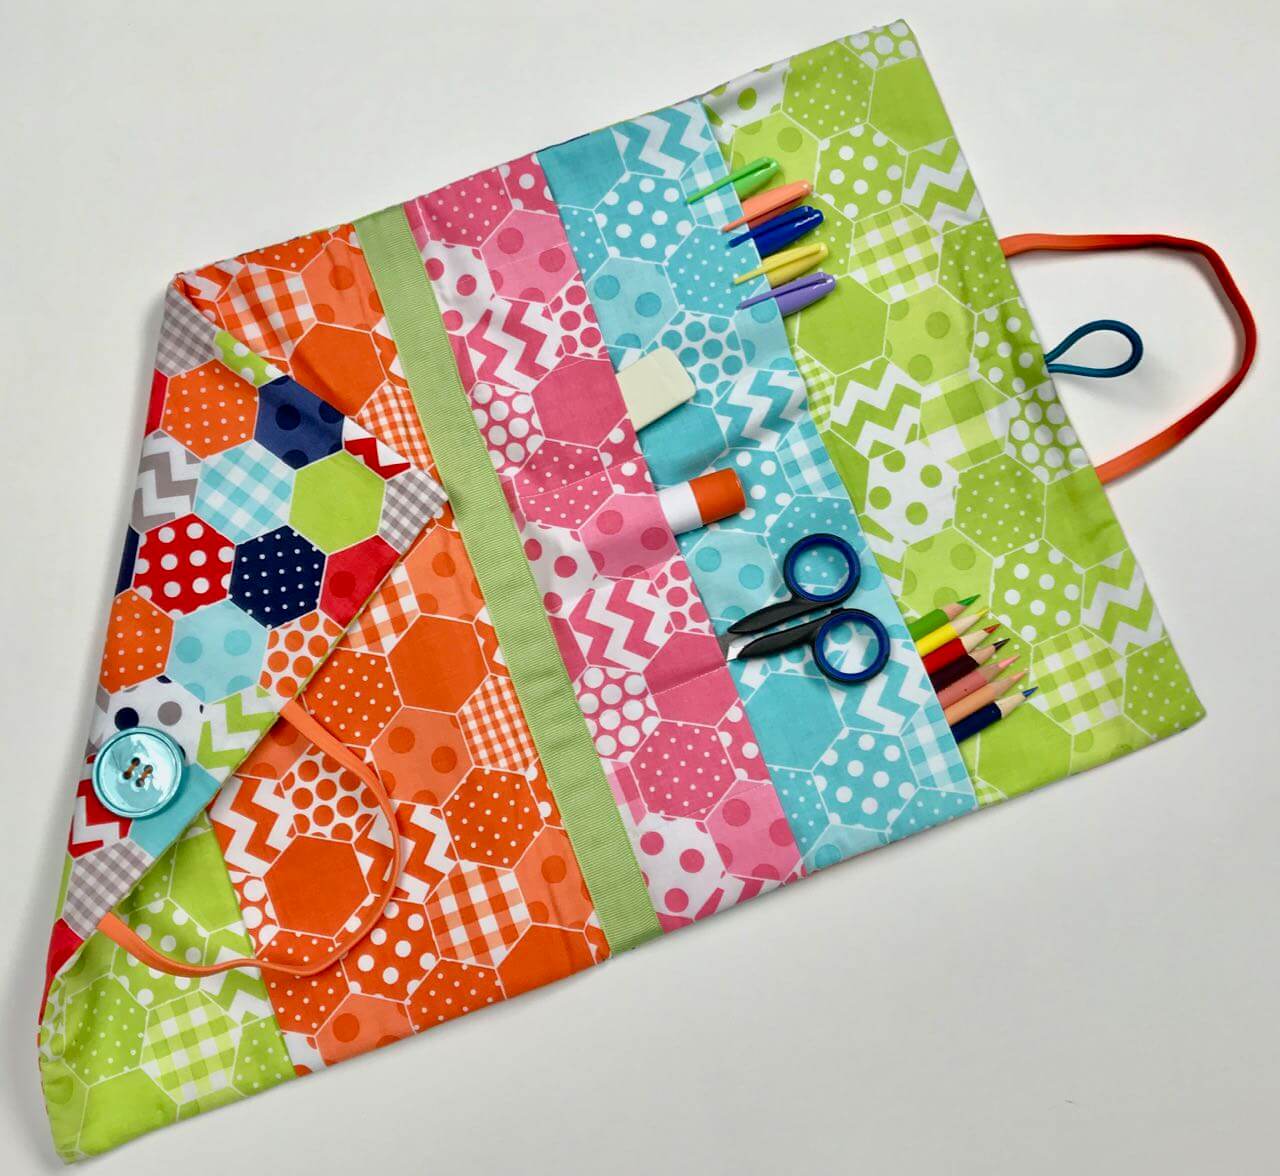 I Sew For Fun Art Caddy Sewing Tutorial at the Nancy Zieman Productions Blog